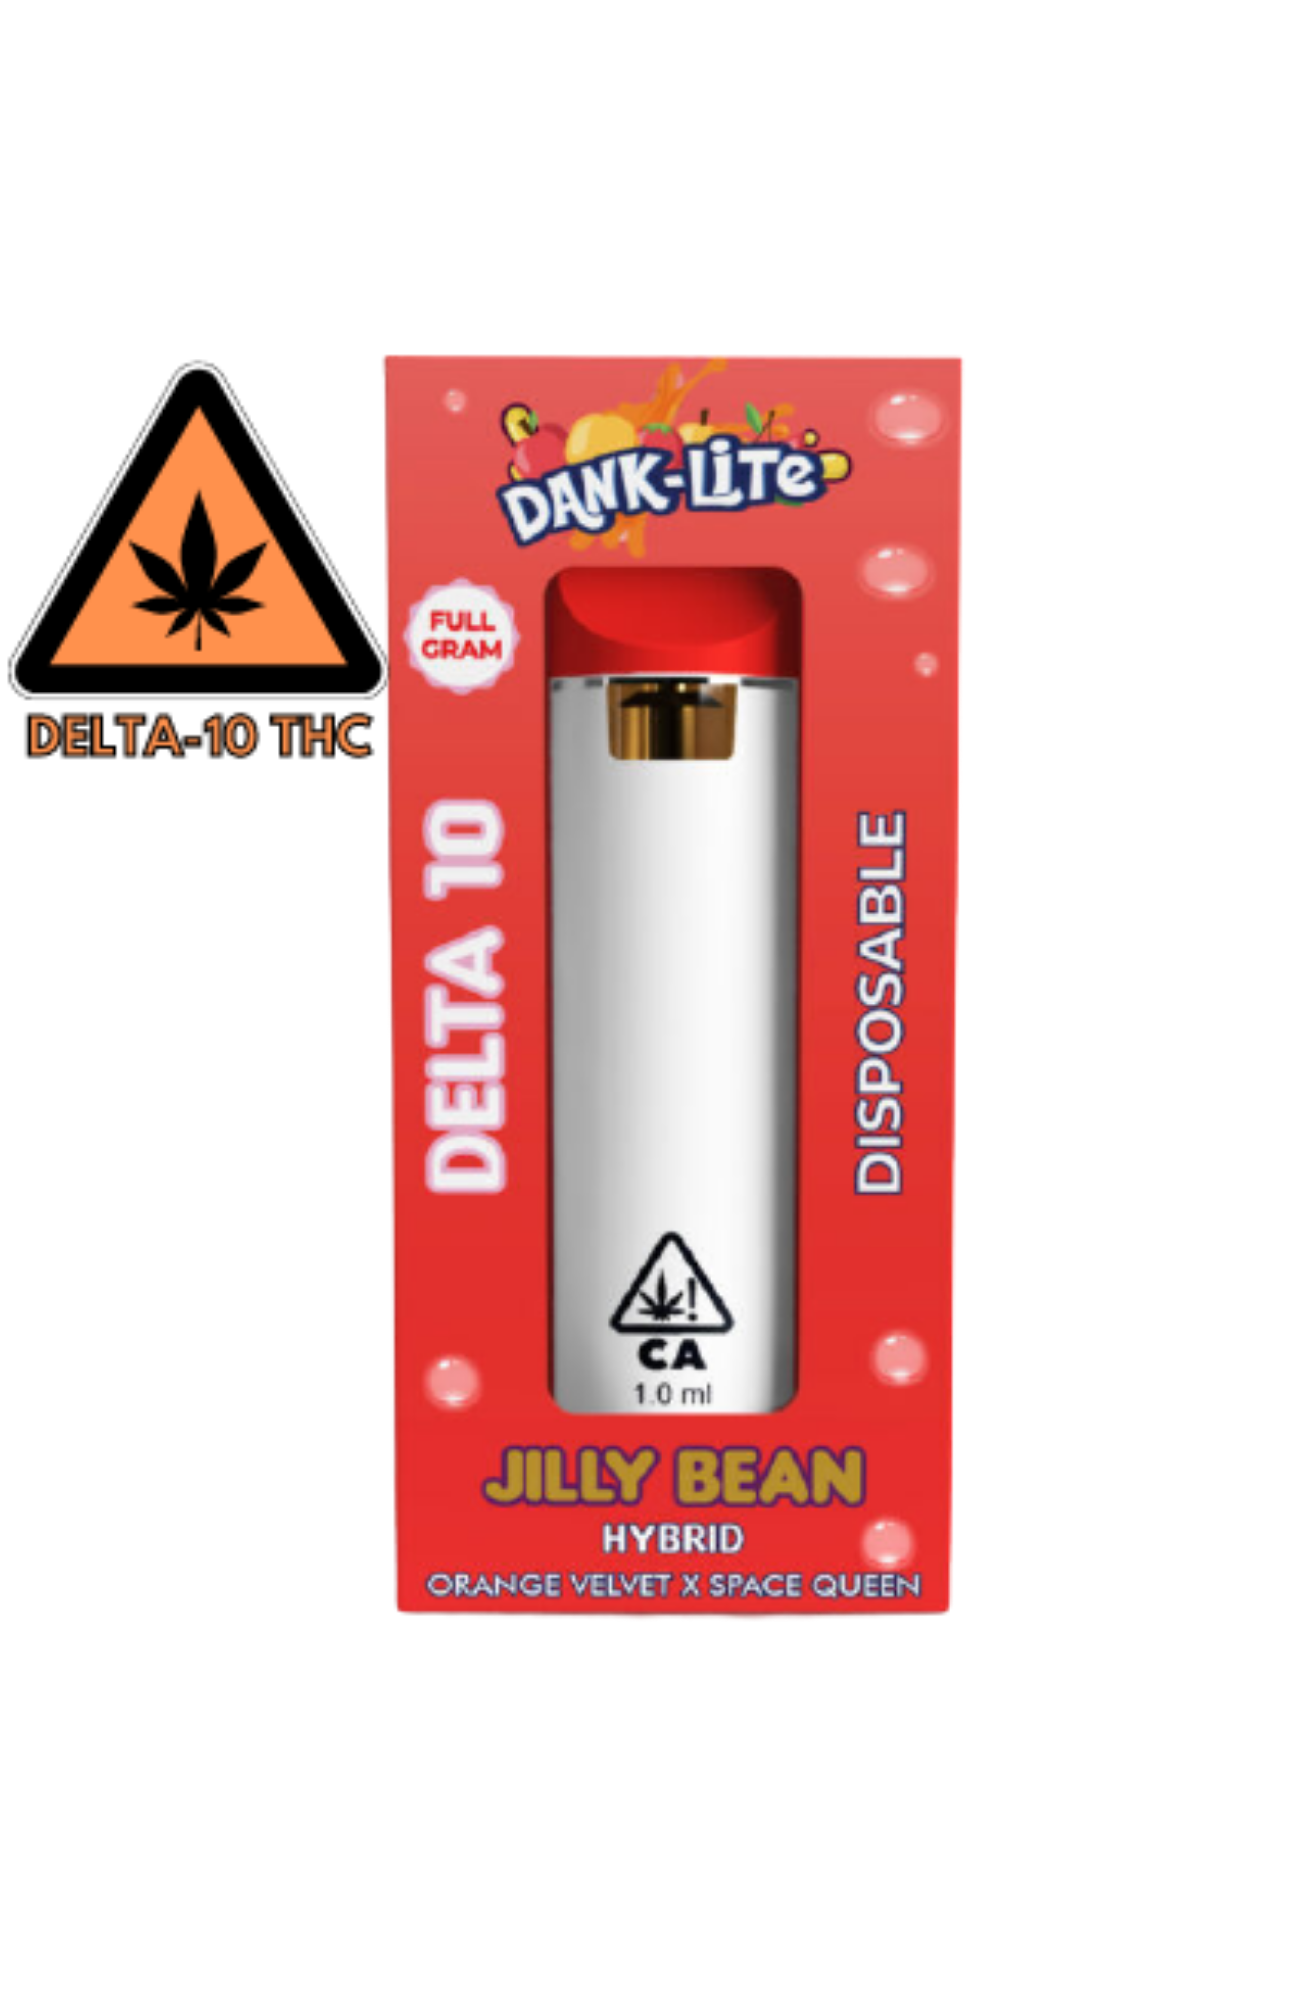 How To Install Dl-10 Cartridge For Delta Scald-guard Tub/shower Single-lever Faucets - Thc|Delta|Products|Delta-10|Effects|Cbd|Cannabis|Cannabinoids|Cannabinoid|Hemp|Oil|Body|Benefits|Pain|Drug|Inflammation|People|Receptors|Gummies|Arthritis|Market|Product|Marijuana|Delta-8|Research|States|Cb1|Test|Strains|Effect|Vape|Experience|Users|Time|Compound|System|Way|Anxiety|Plants|Chemical|Delta-10 Thc|Delta-9 Thc|Cbd Oil|Drug Test|Delta-10 Products|Side Effects|Delta-8 Thc|Cb1 Receptors|Cb2 Receptors|Cannabis Plants|Endocannabinoid System|Minor Discomfort|Medical Marijuana|Thc Products|Psychoactive Effects|Arthritic Symptoms|New Cannabinoid|Fusion Farms|Arthritic Patients|Conclusion Delta|Medical Cannabis Oil|Arthritis Pain|Good Fit|Double Bond|Anticonvulsant Actions|Medical Benefit|Anticonvulsant Properties|Epileptic Children|User Guide|Farm Bill